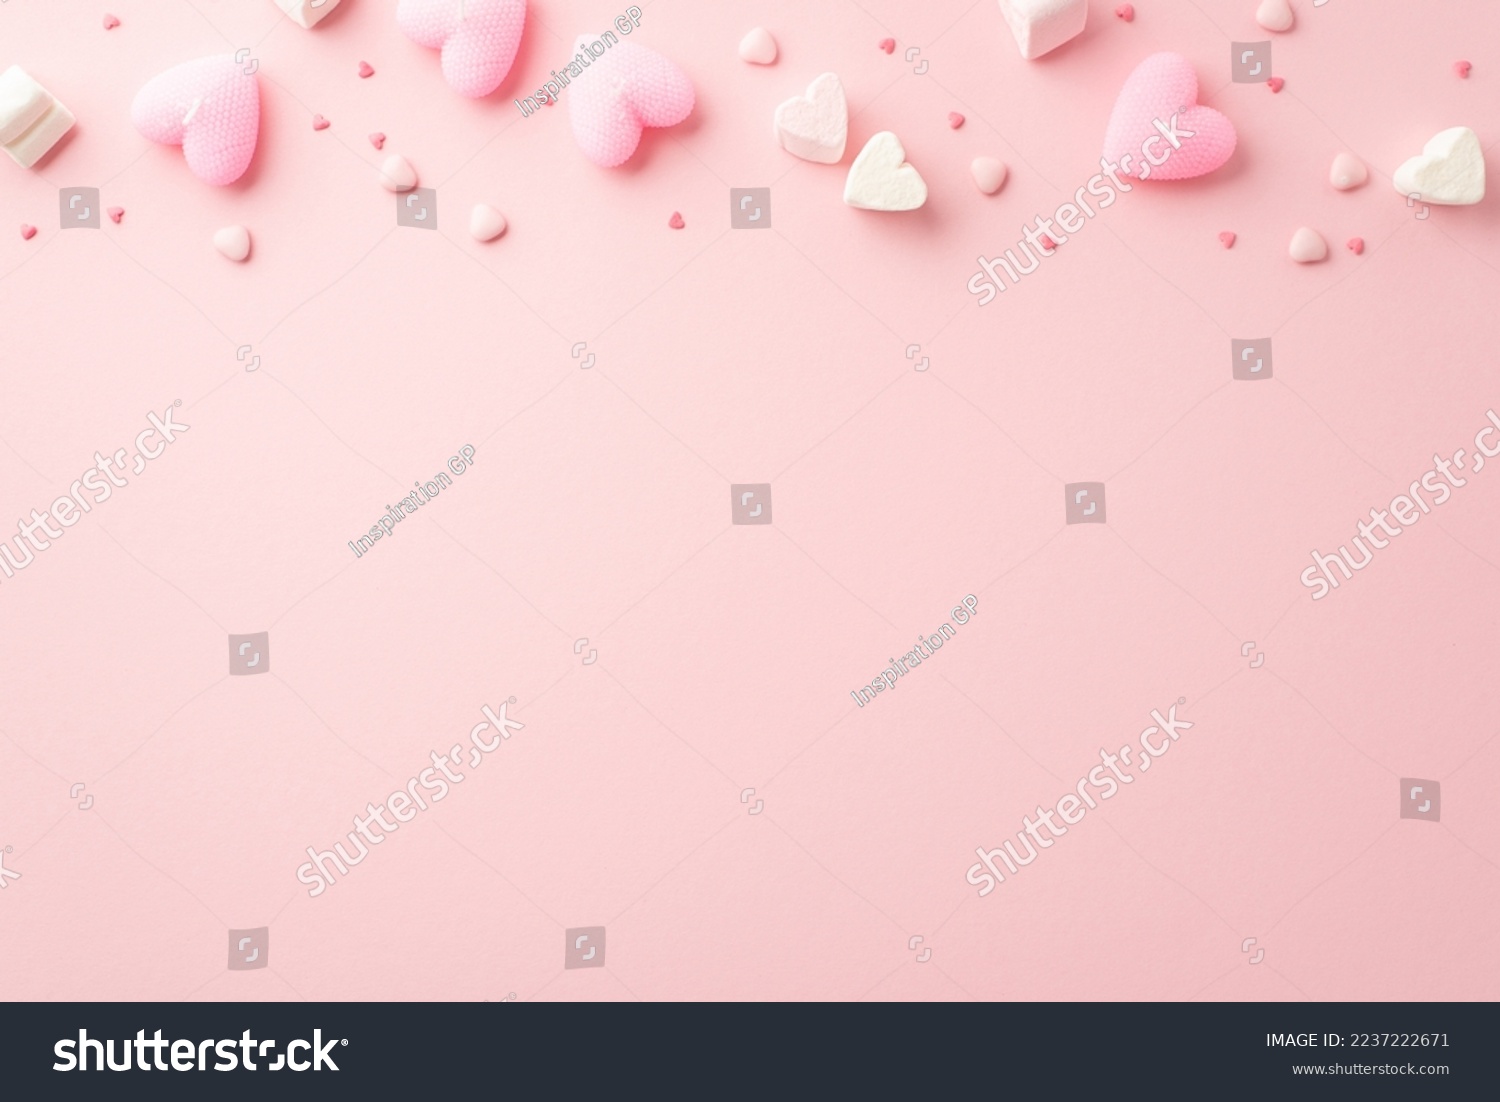 Valentine's Day concept. Top view photo of heart shaped marshmallow candles and sprinkles on isolated light pink background with copyspace #2237222671